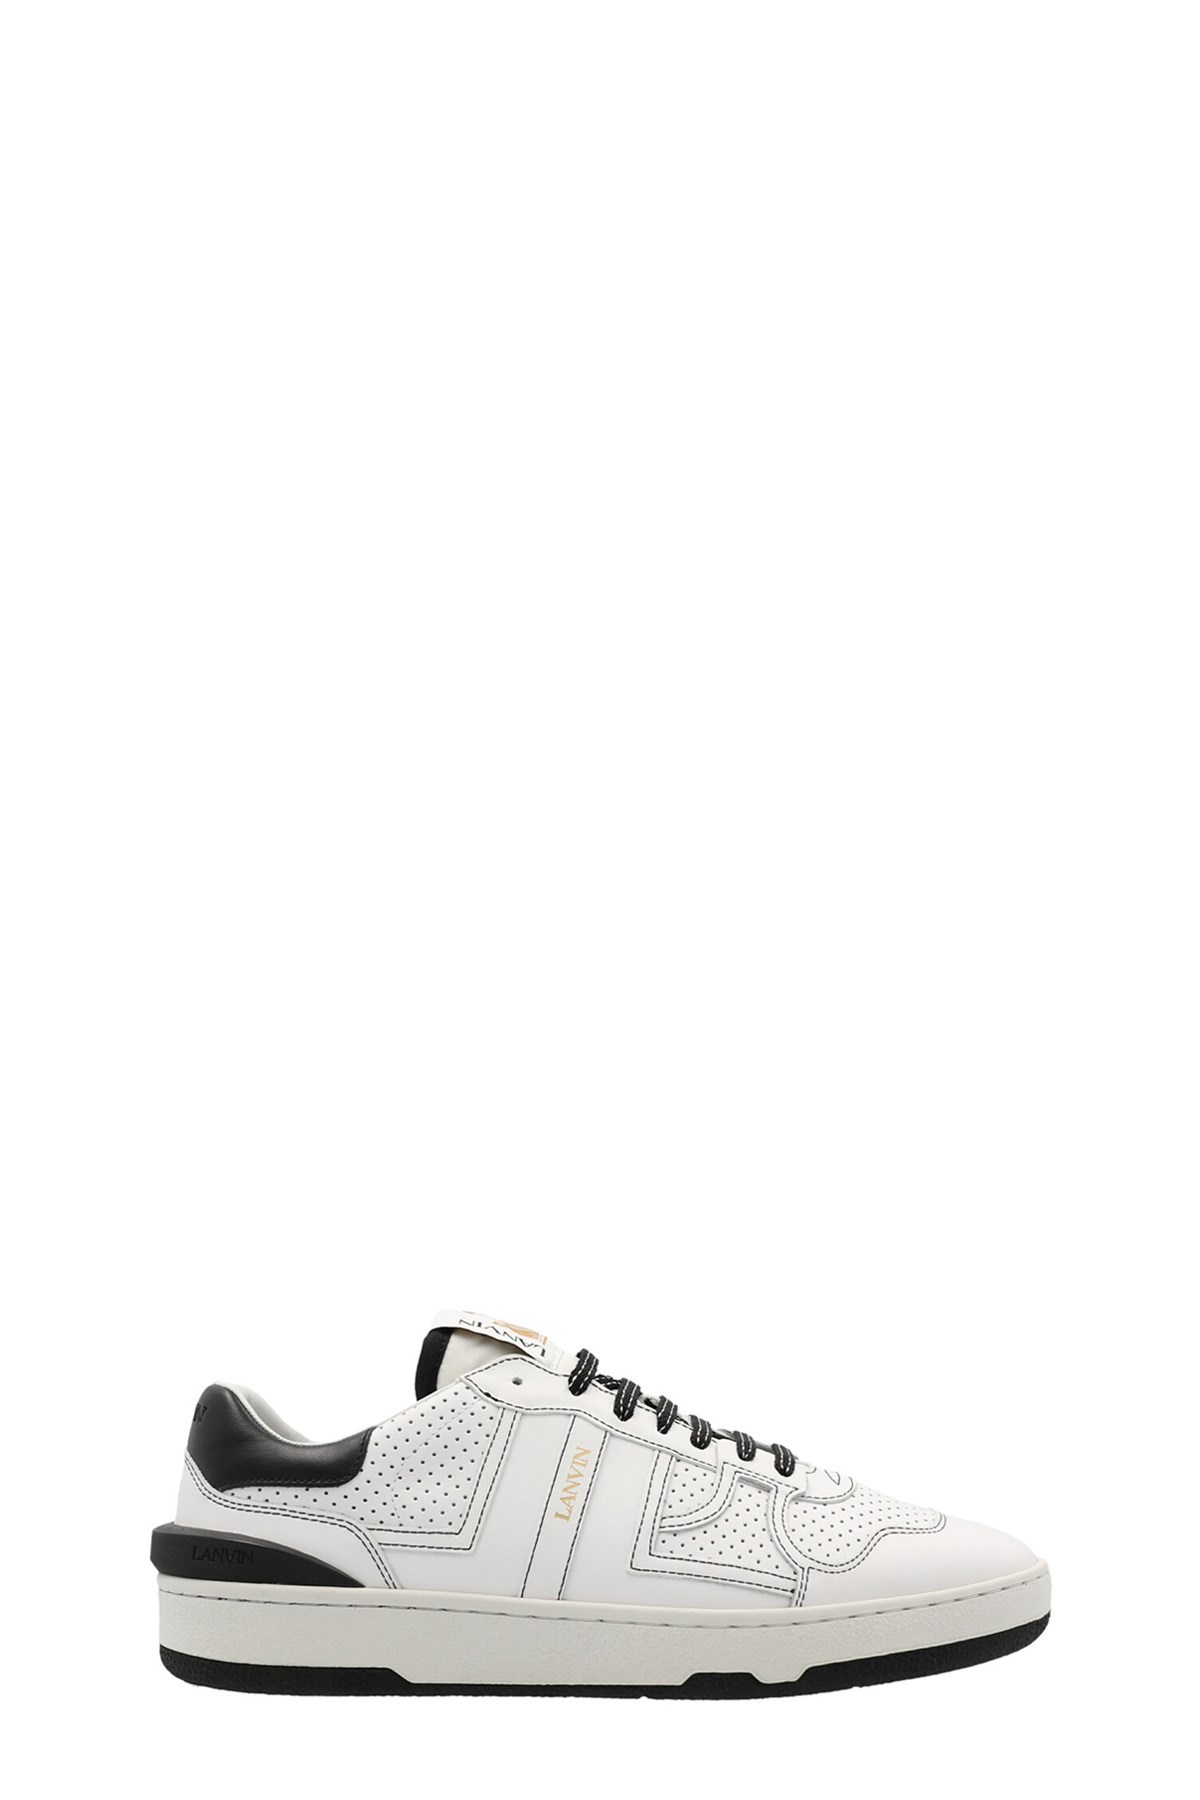 LANVIN 'Clay Low’ Sneakers